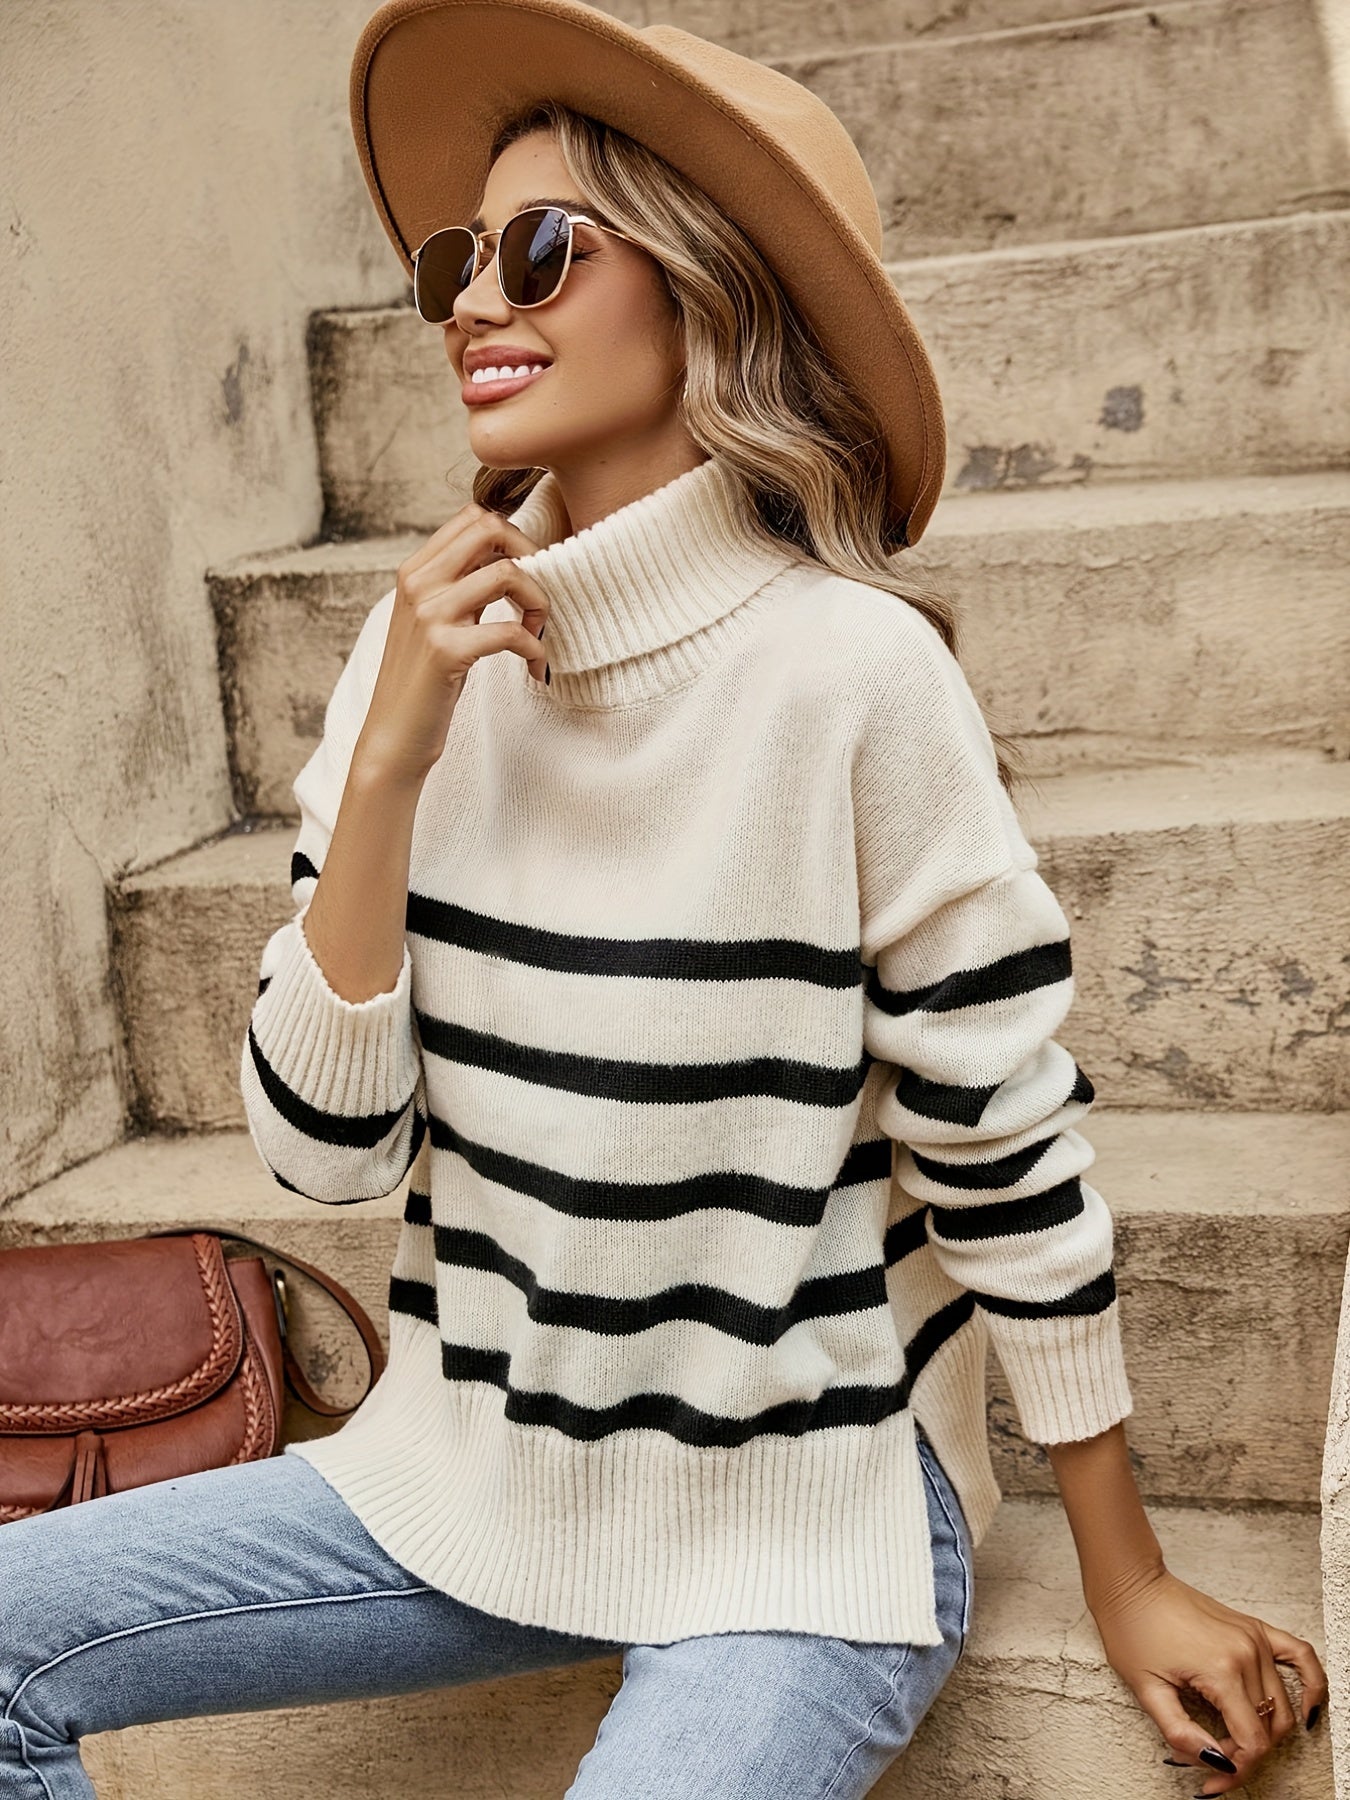 Antmvs Striped Turtle Neck Pullover Sweater, Casual Long Sleeve Split Sweater, Women's Clothing